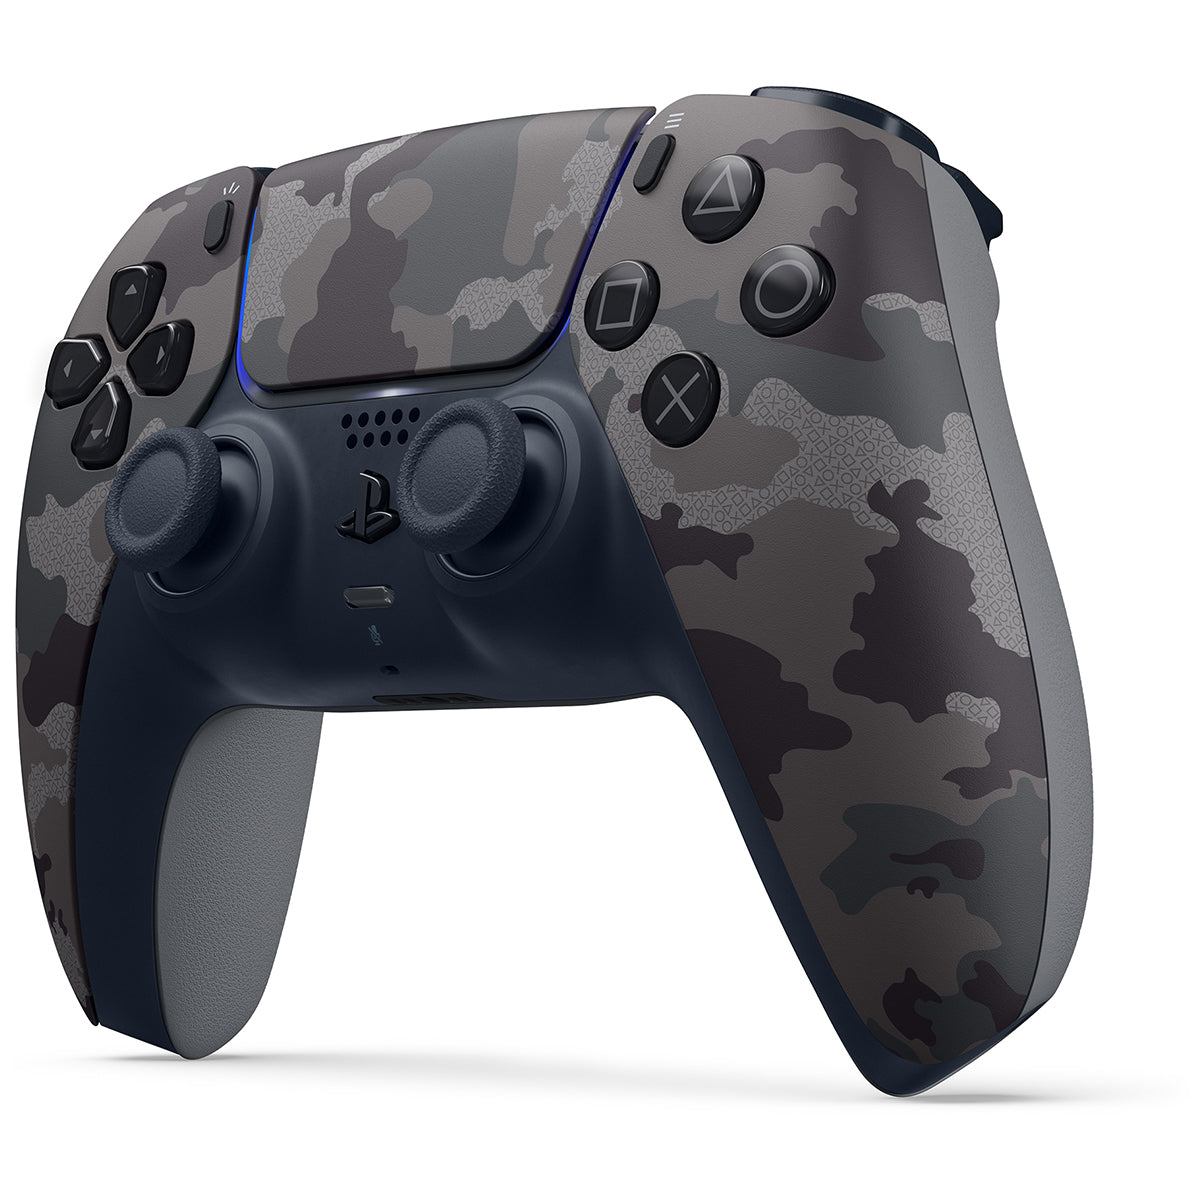 Sony Playstation 5 Disc Edition with Extra Gray Camo Controller and Dual Charging Dock Bundle - Pro-Distributing